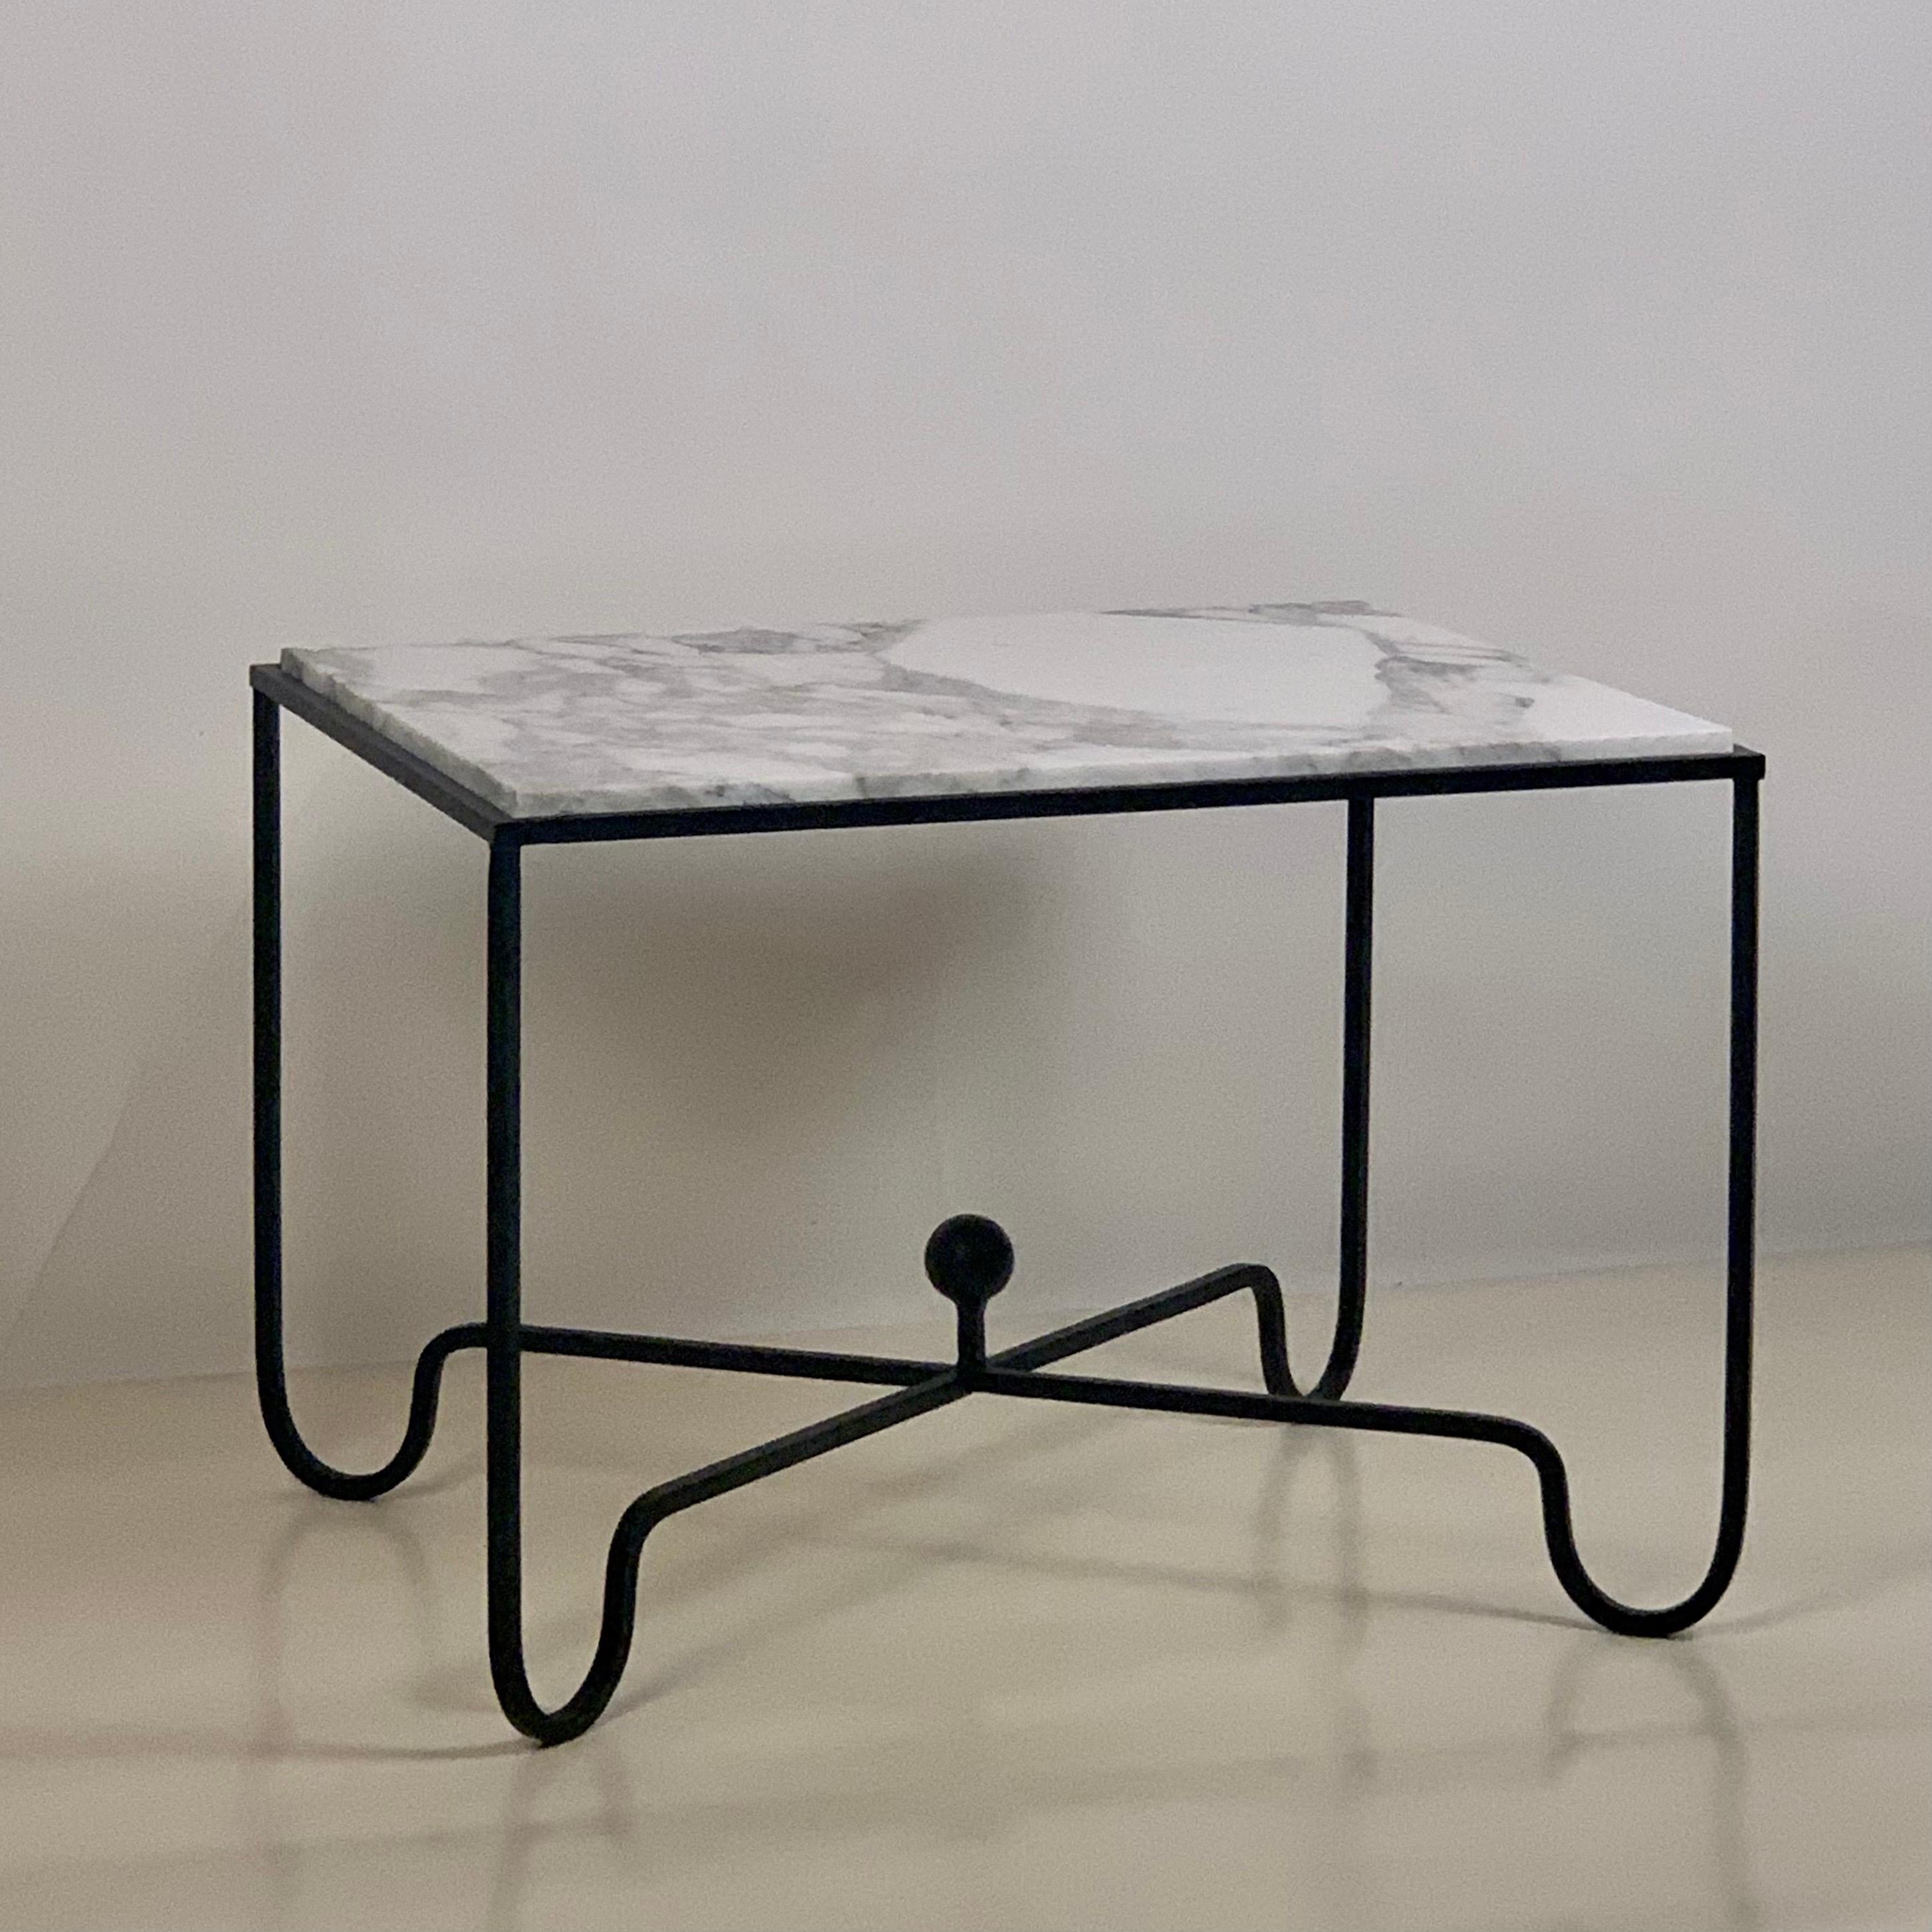 French Pair of Extra Large 'Entretoise' Arabescato Marble Side Tables by Design Frères For Sale